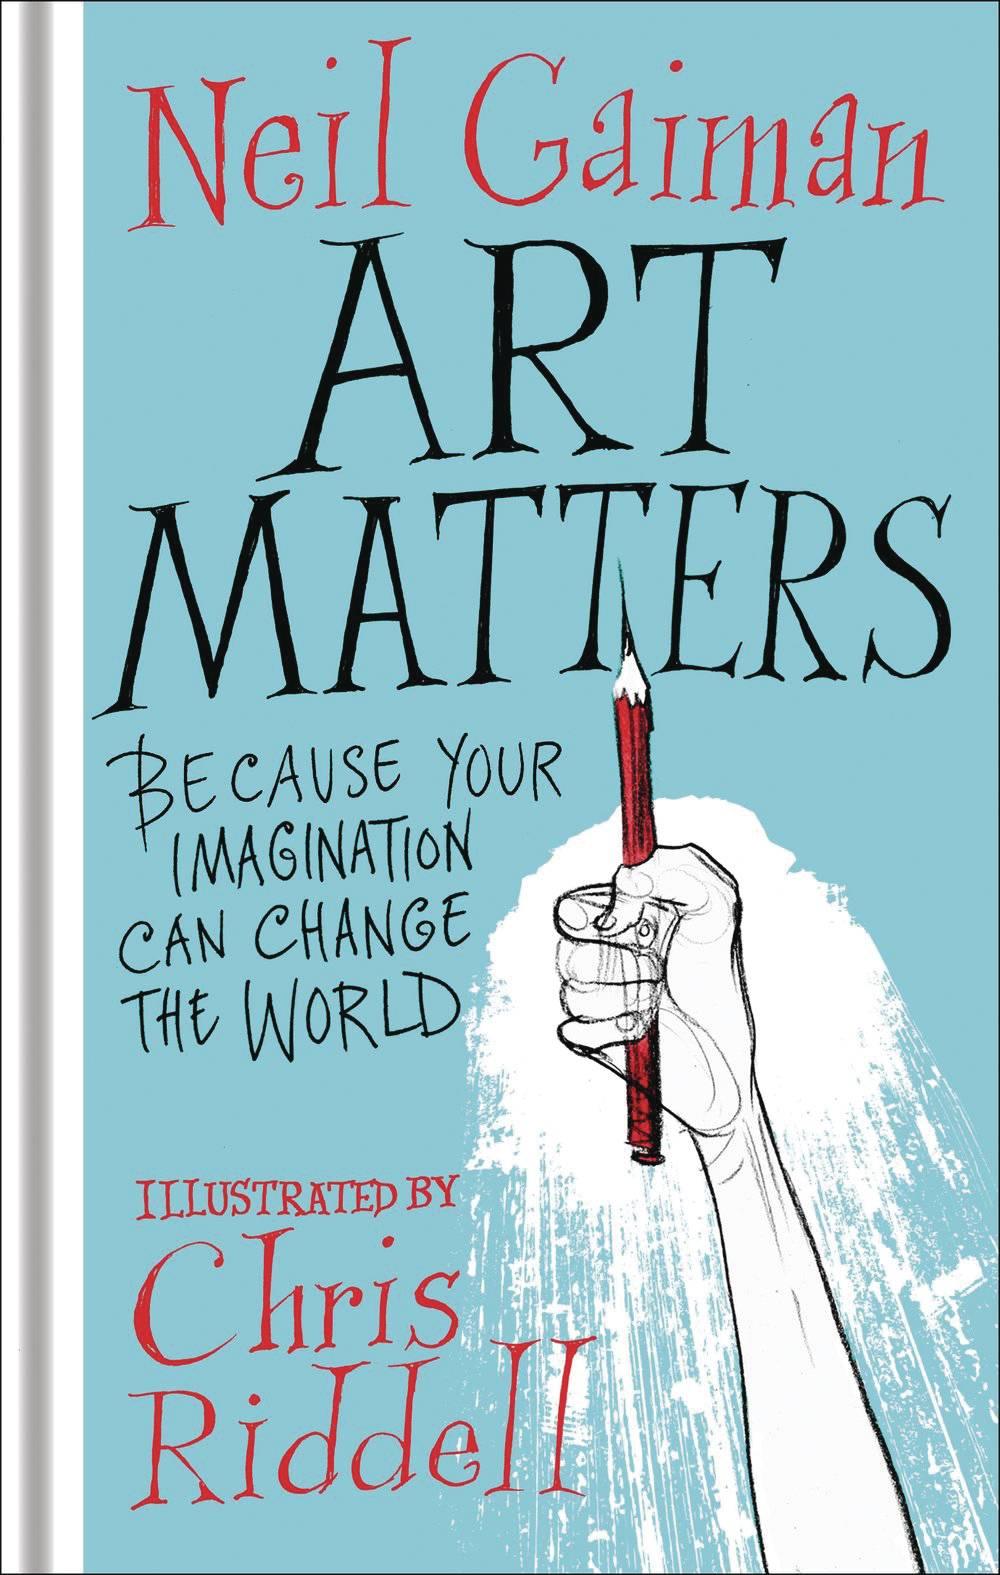 ART MATTERS BECAUSE YOUR IMAGINATION CAN CHANGE WORLD - Kings Comics